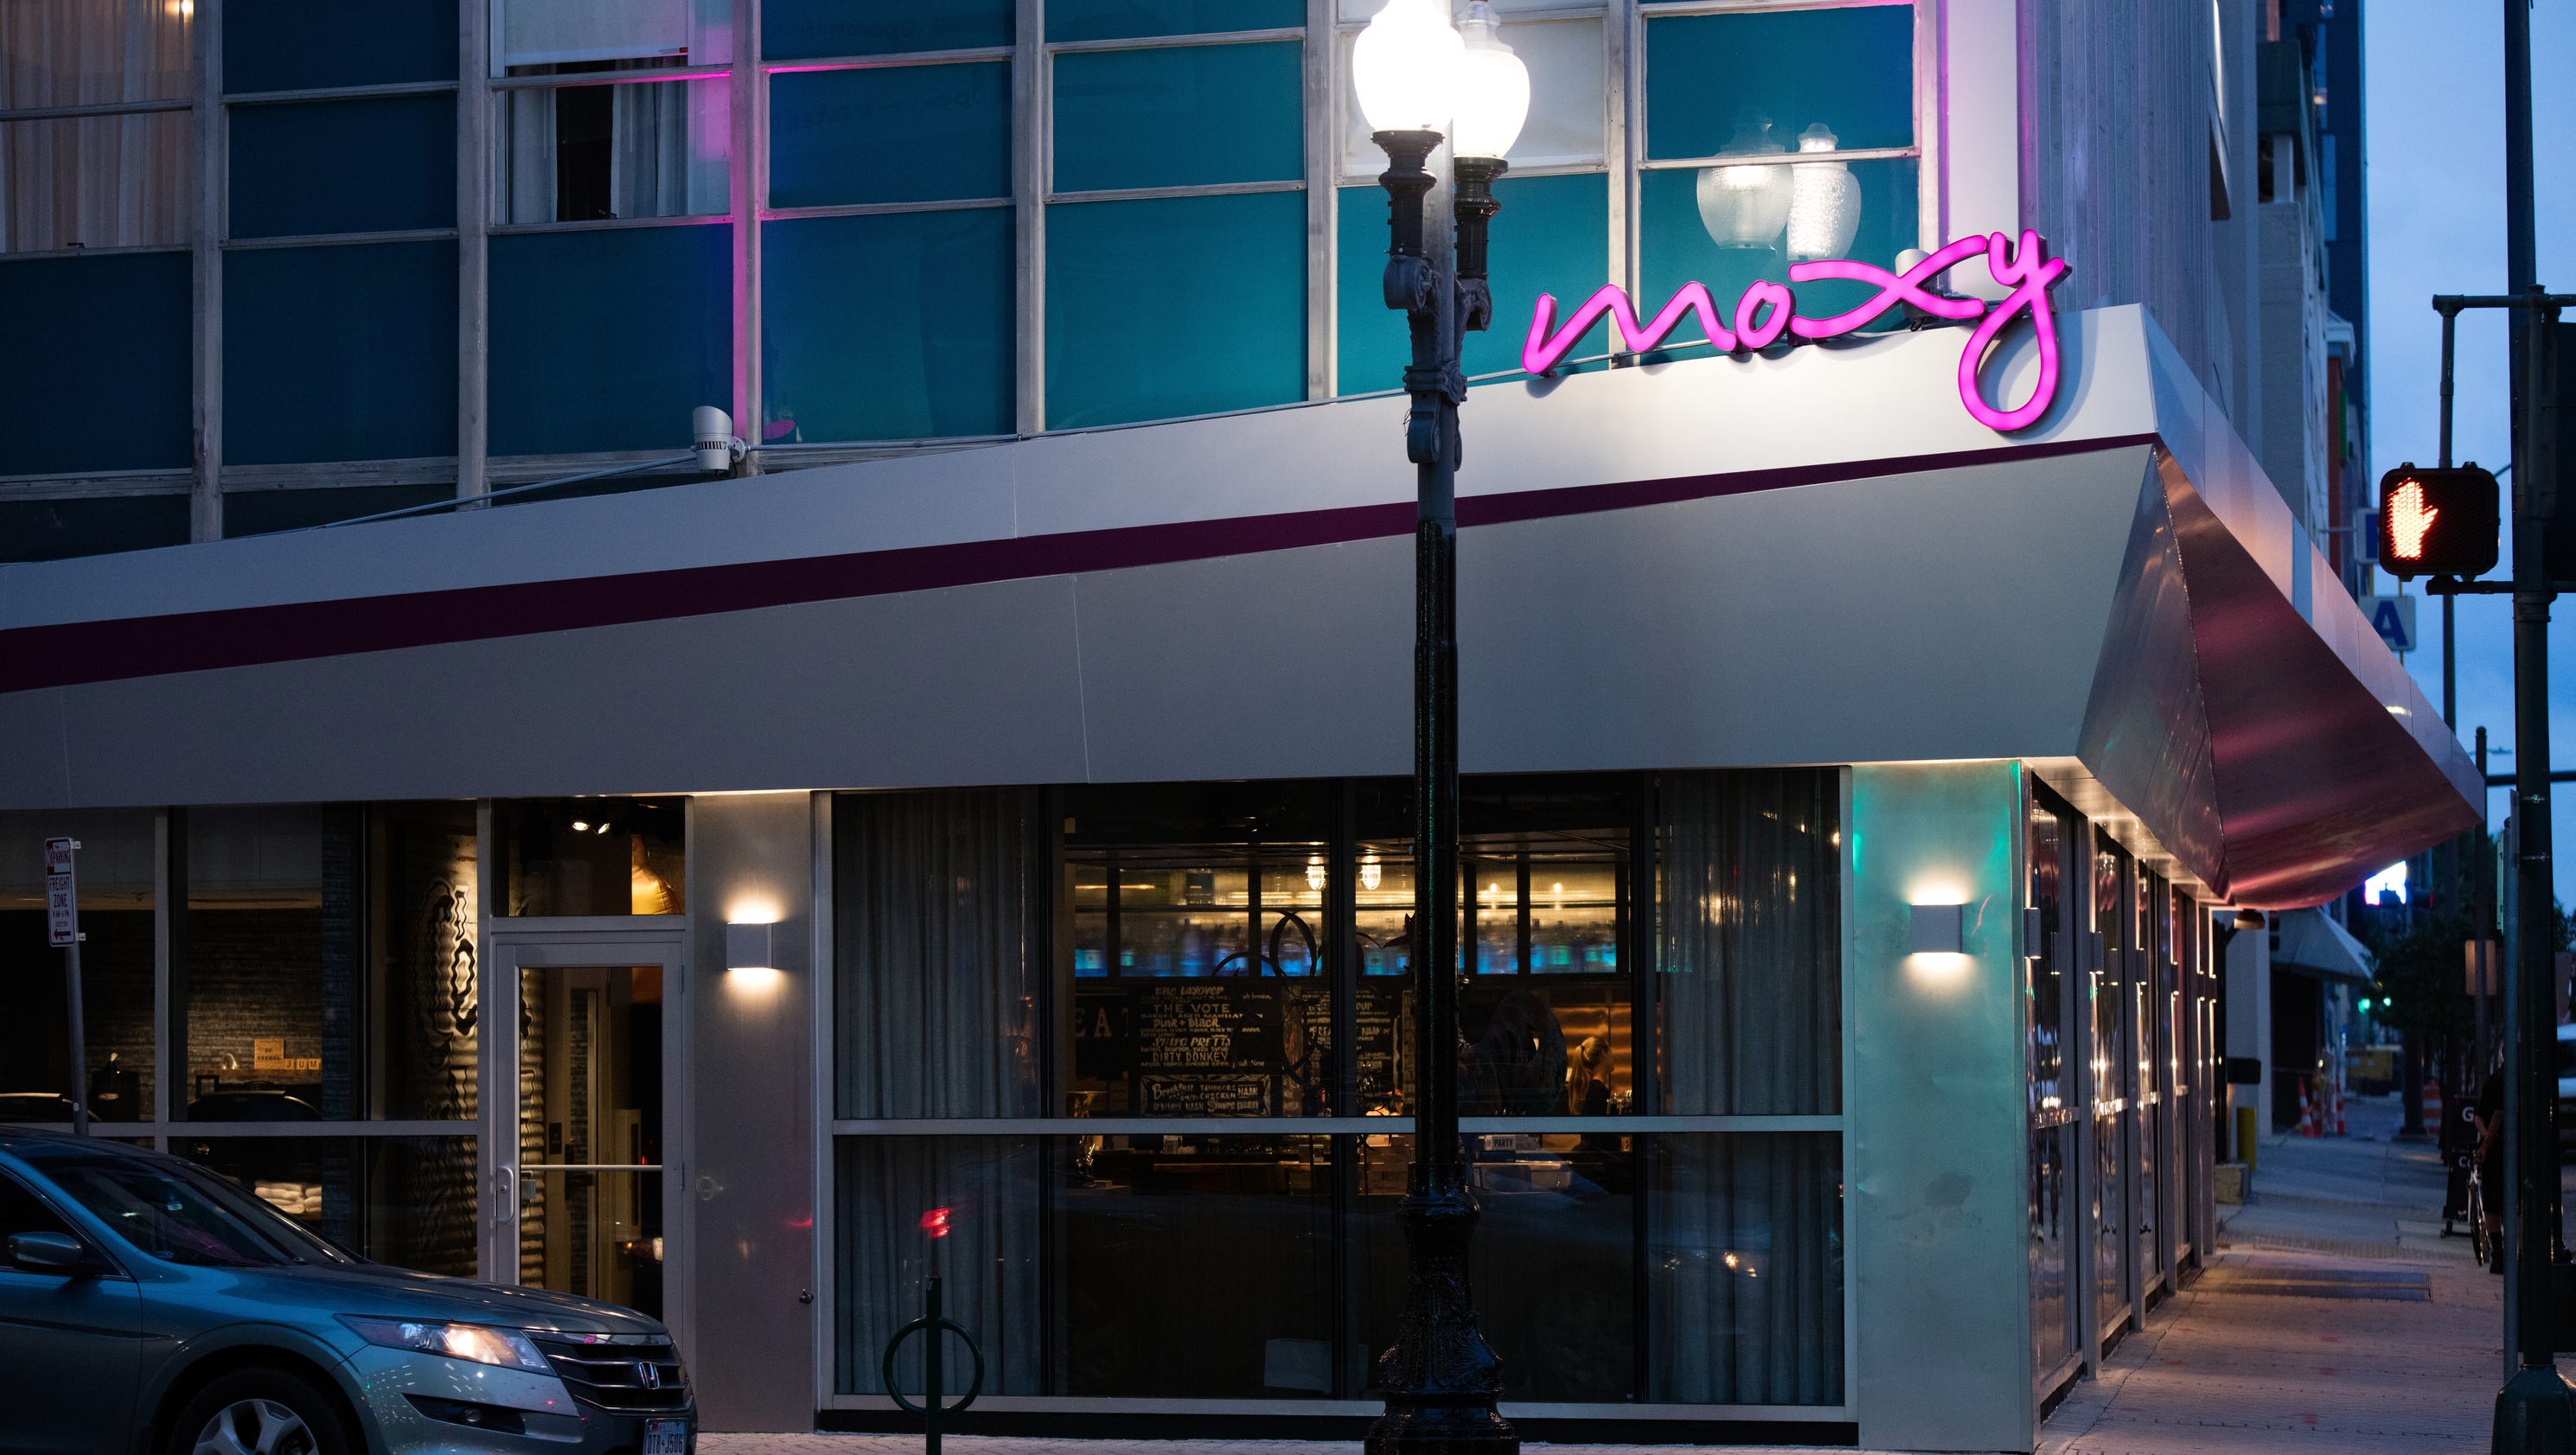 First look at Marriott's new Moxy hotel brand in New Orleans3200 x 1680